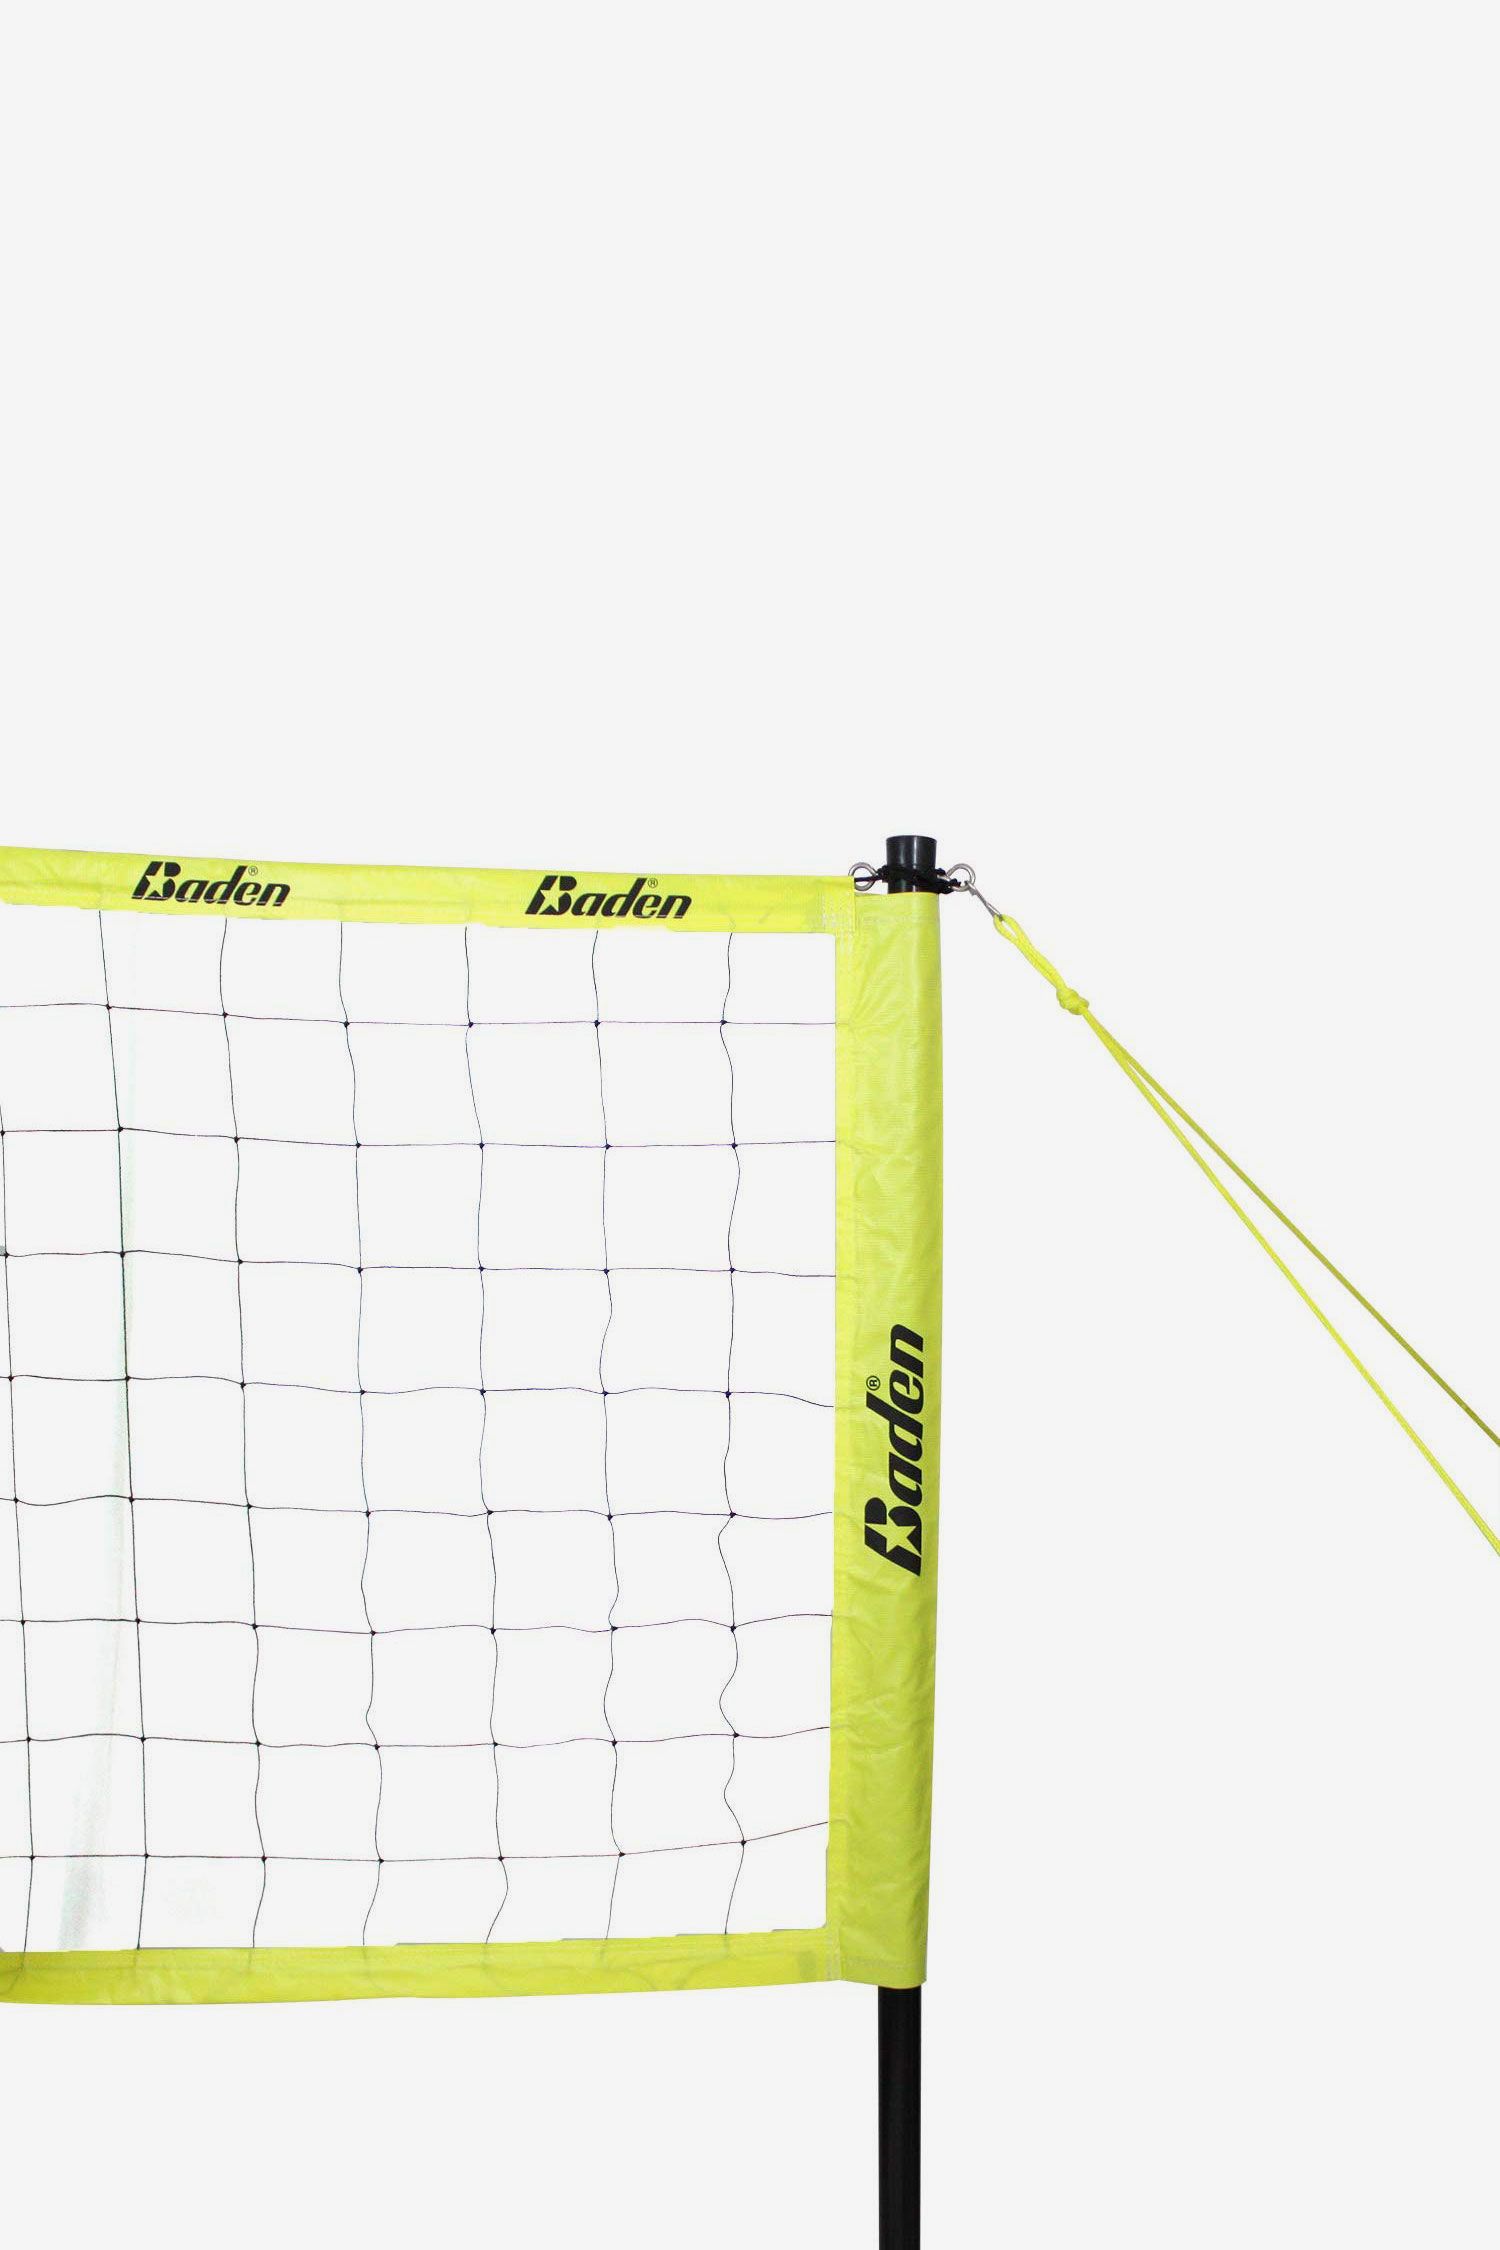 HTY05 HANSHI 710CM*60CM Adjustable Volleyball Net Training Net Foldable Official Standard Size Indoor Outdoor Sports Equipment With Steel Cable For Garden Beach Schoolyard And Swimming Pool